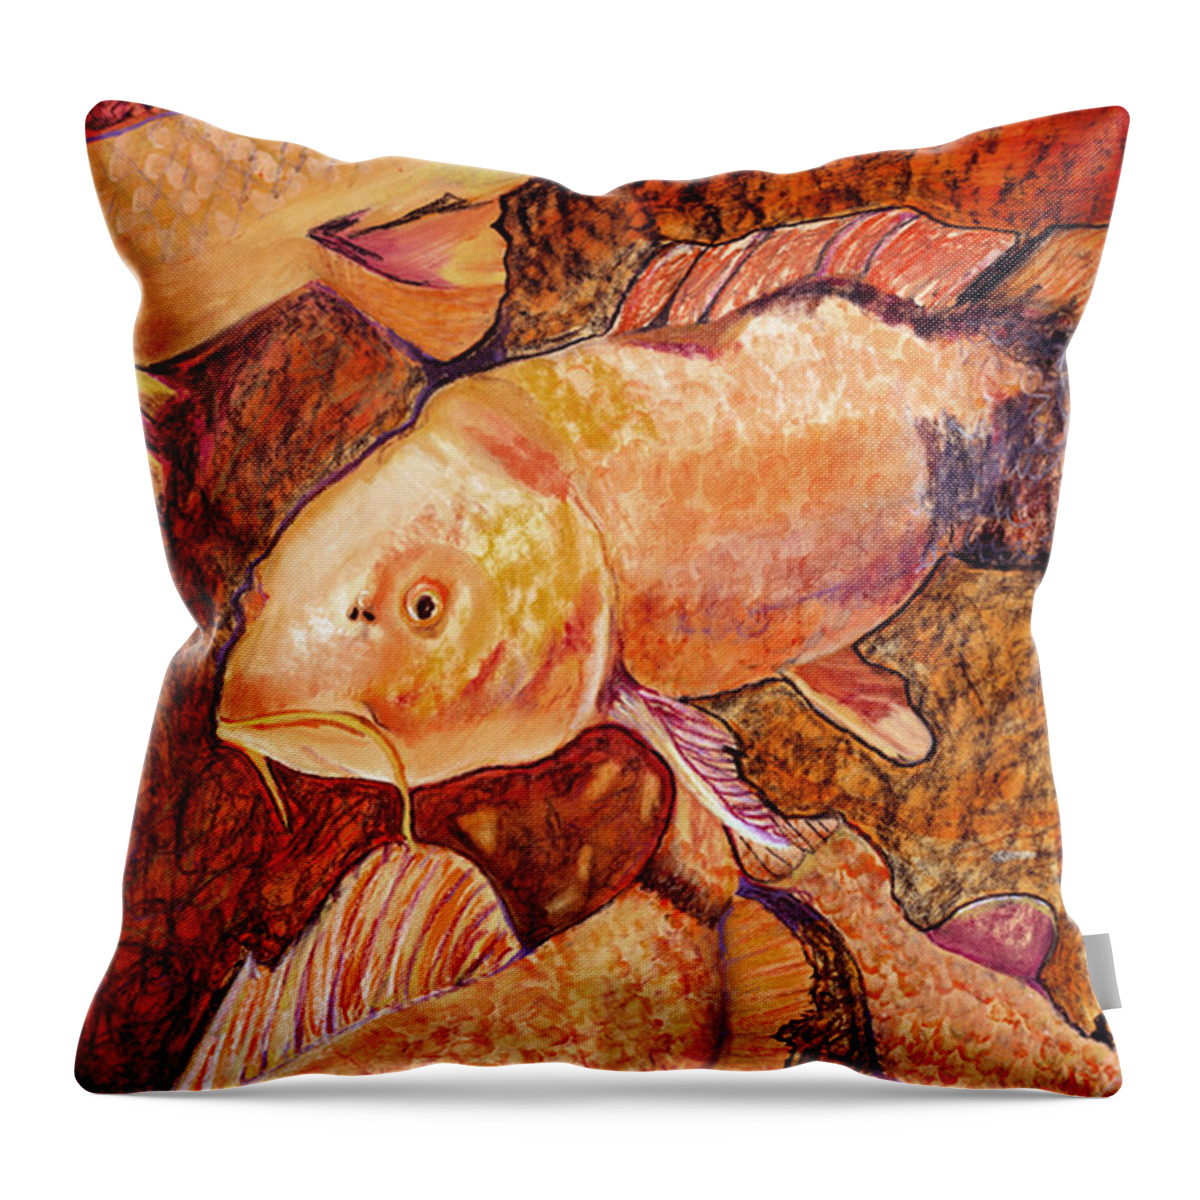 Fish Throw Pillow featuring the painting Golden Koi by Pat Saunders-White